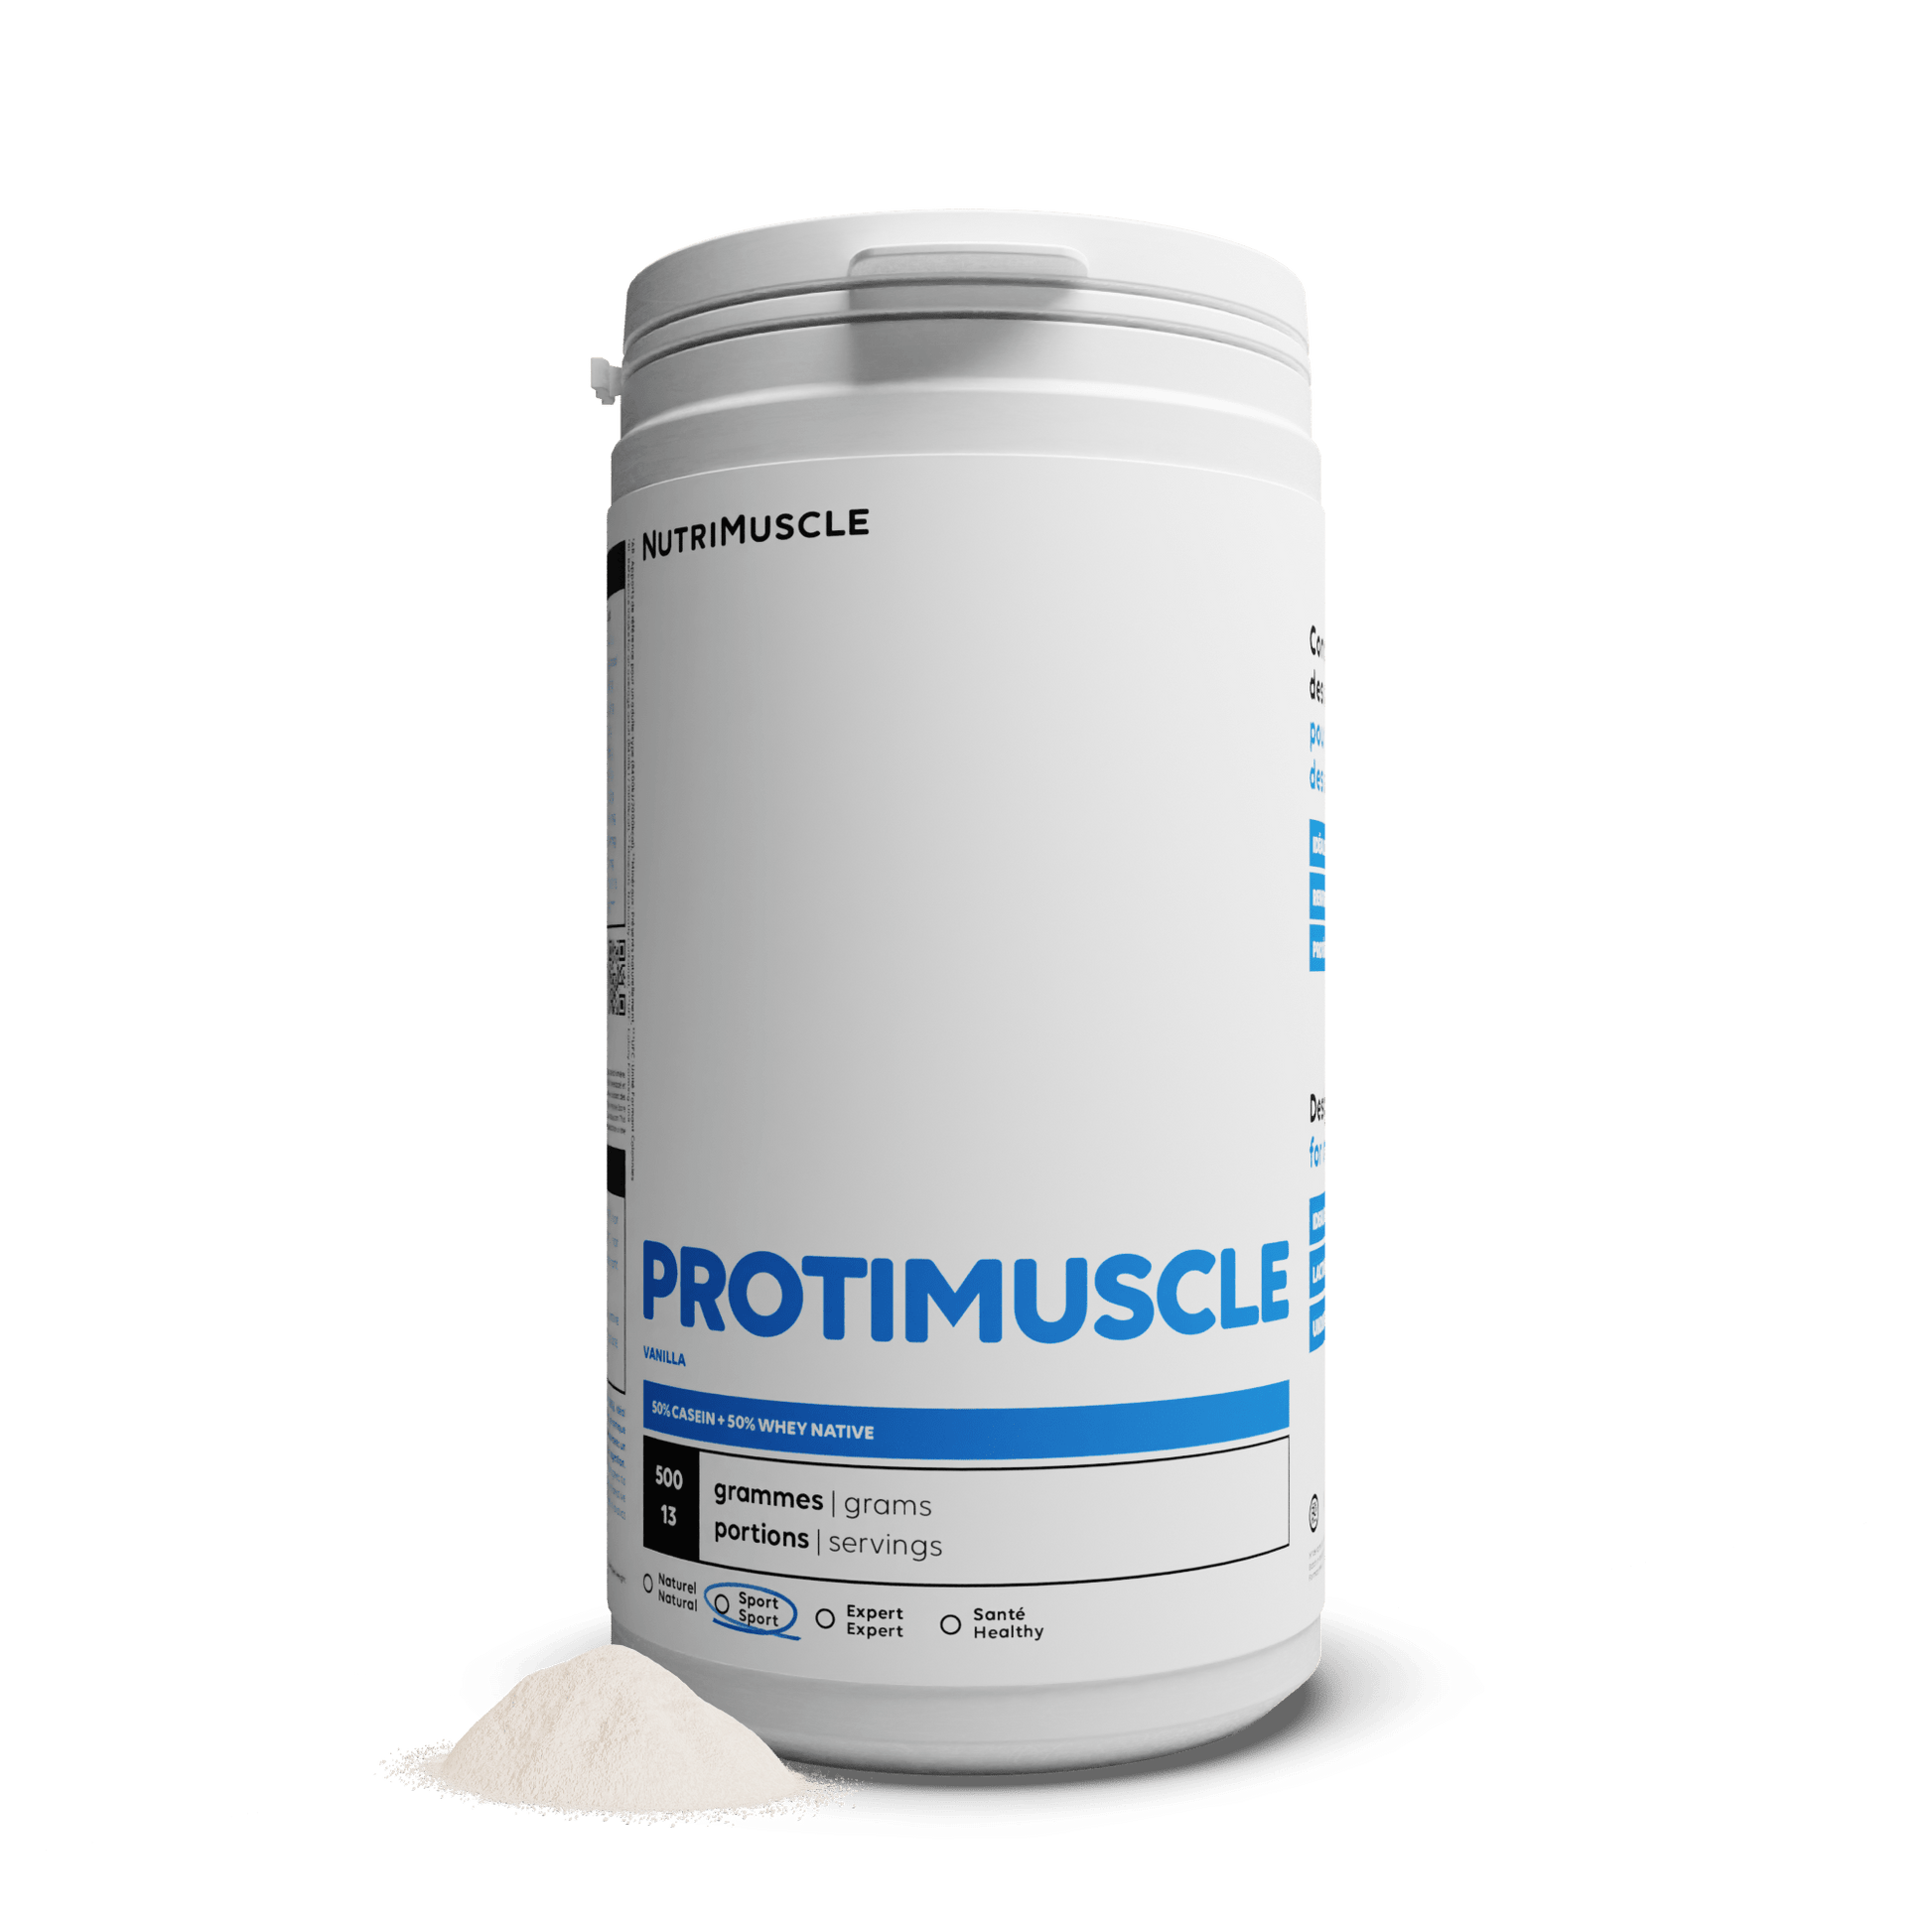 Nutrimuscle Protéines Protimuscle - Mix Protein